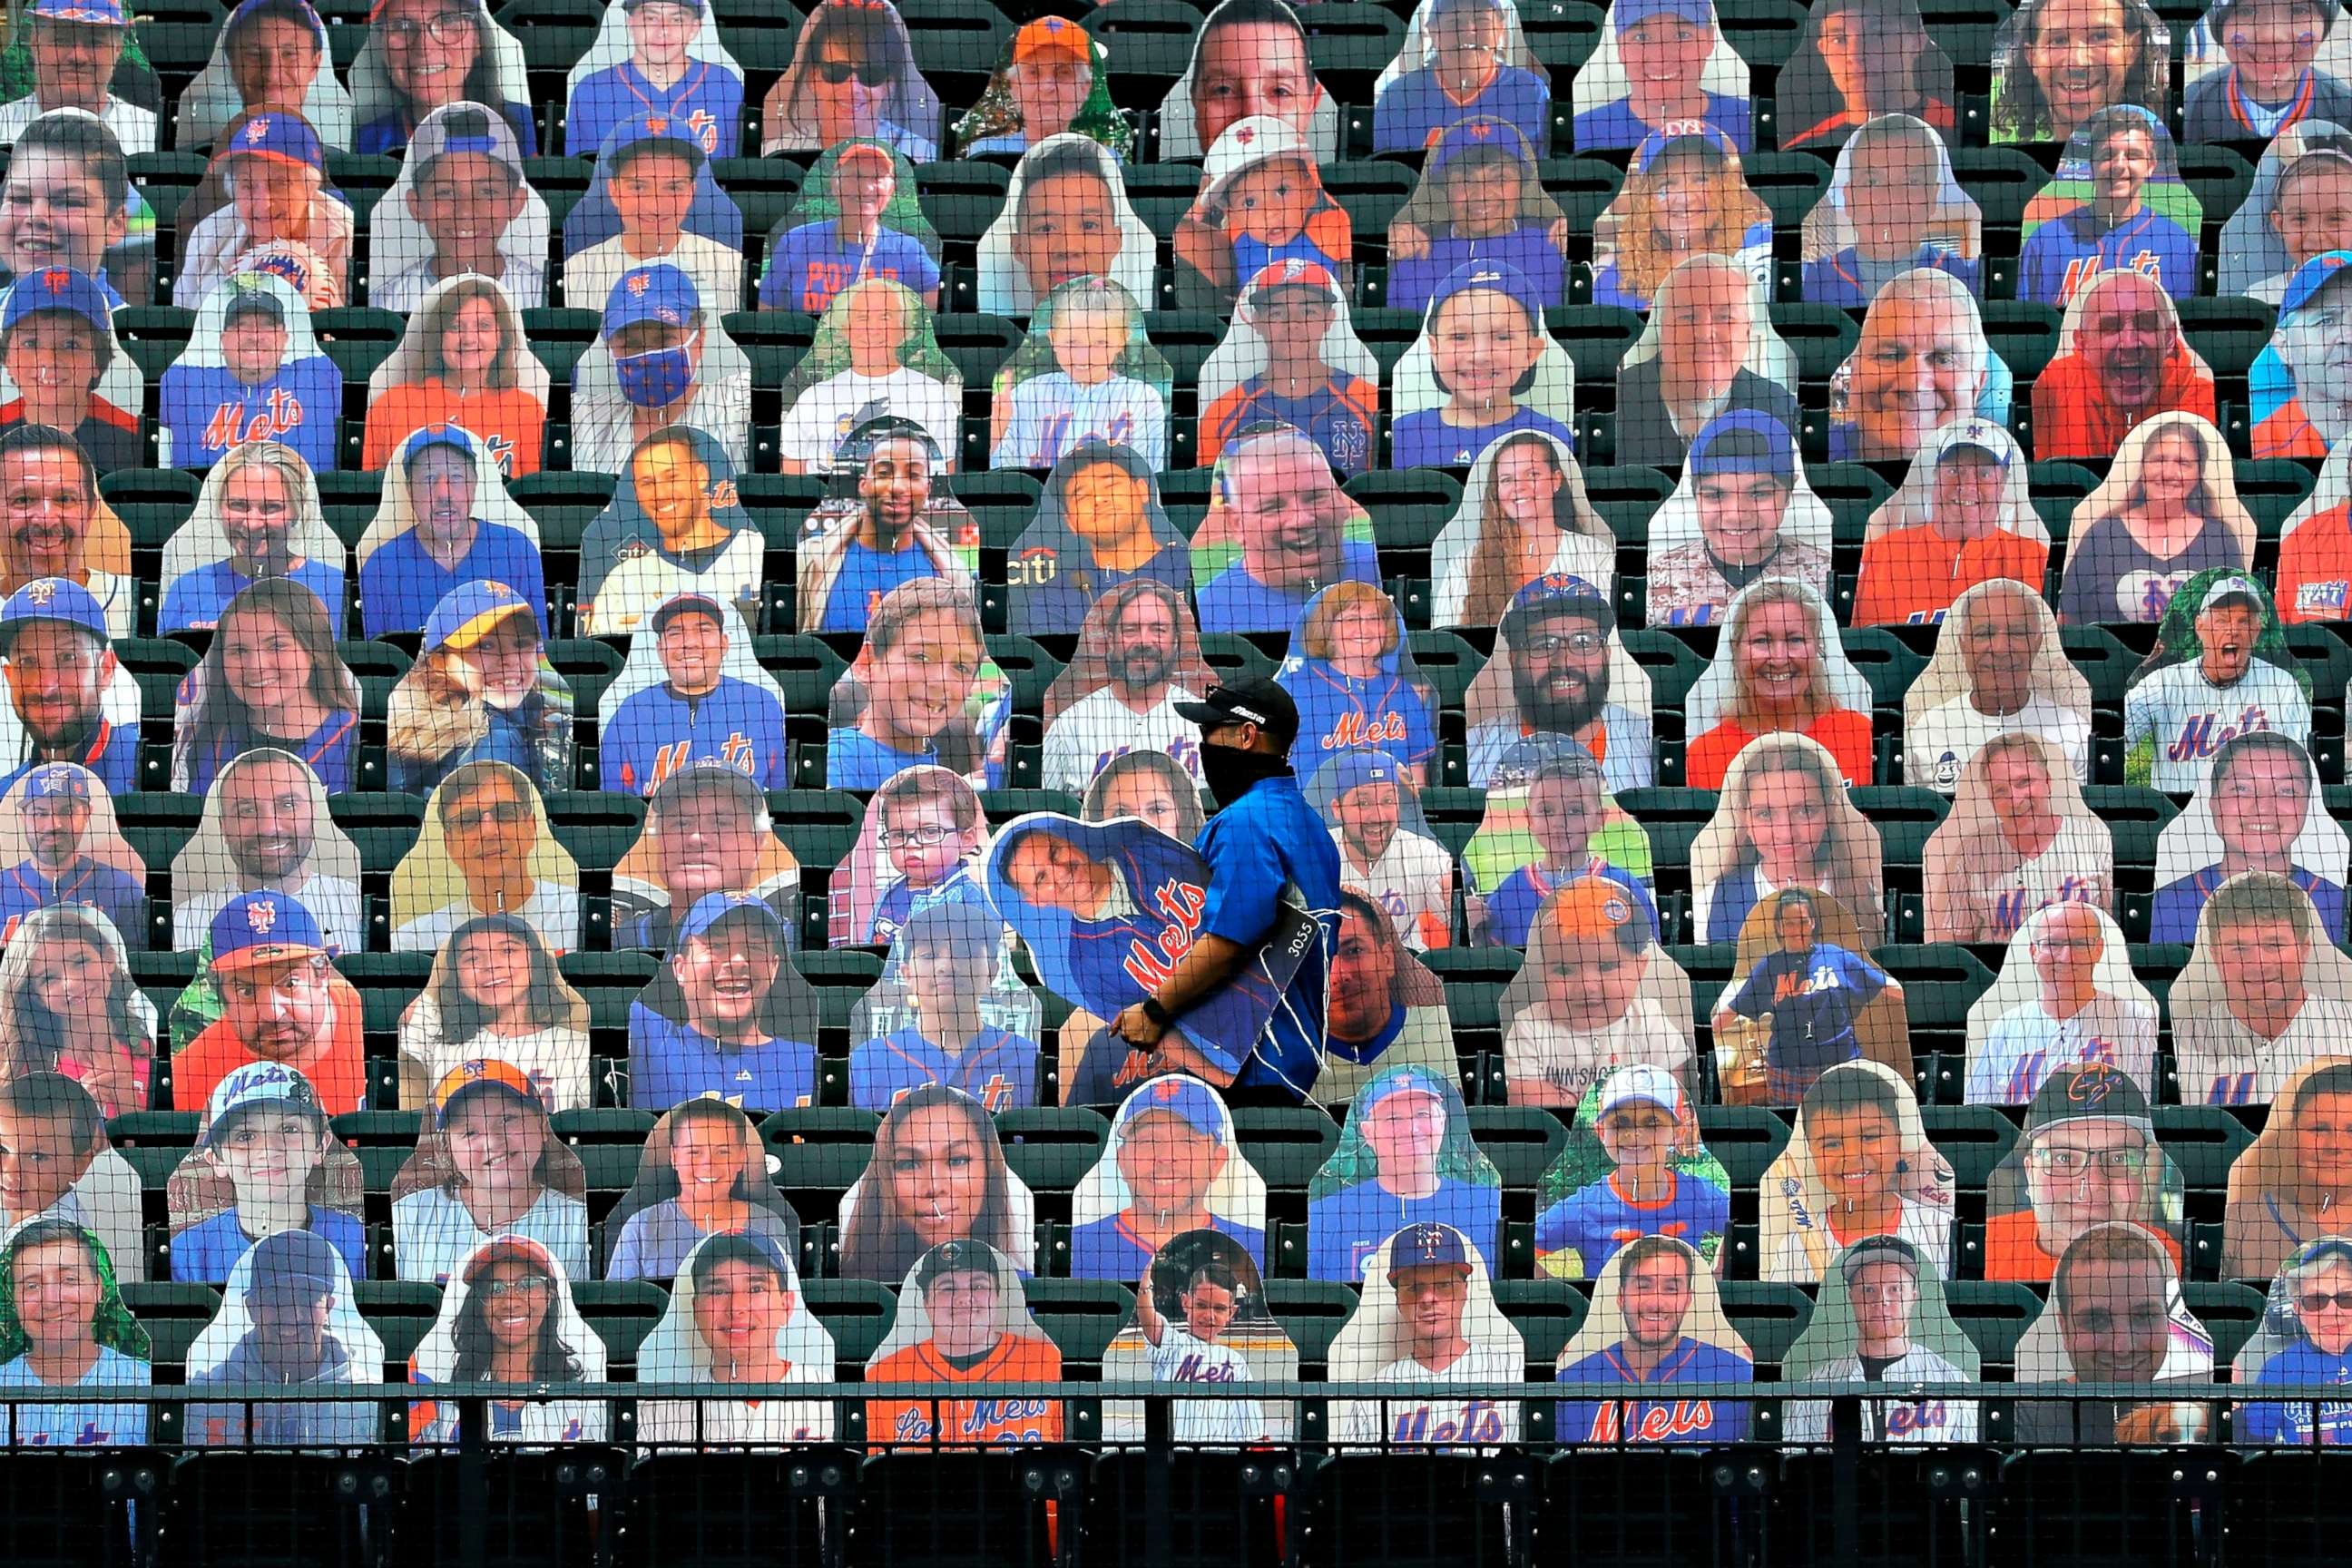 PHOTO: New York Mets employees place cutouts of fans in the seats before the opening day baseball game between the Mets and the Atlanta Braves at Citi Field on July 24, 2020, in New York City.